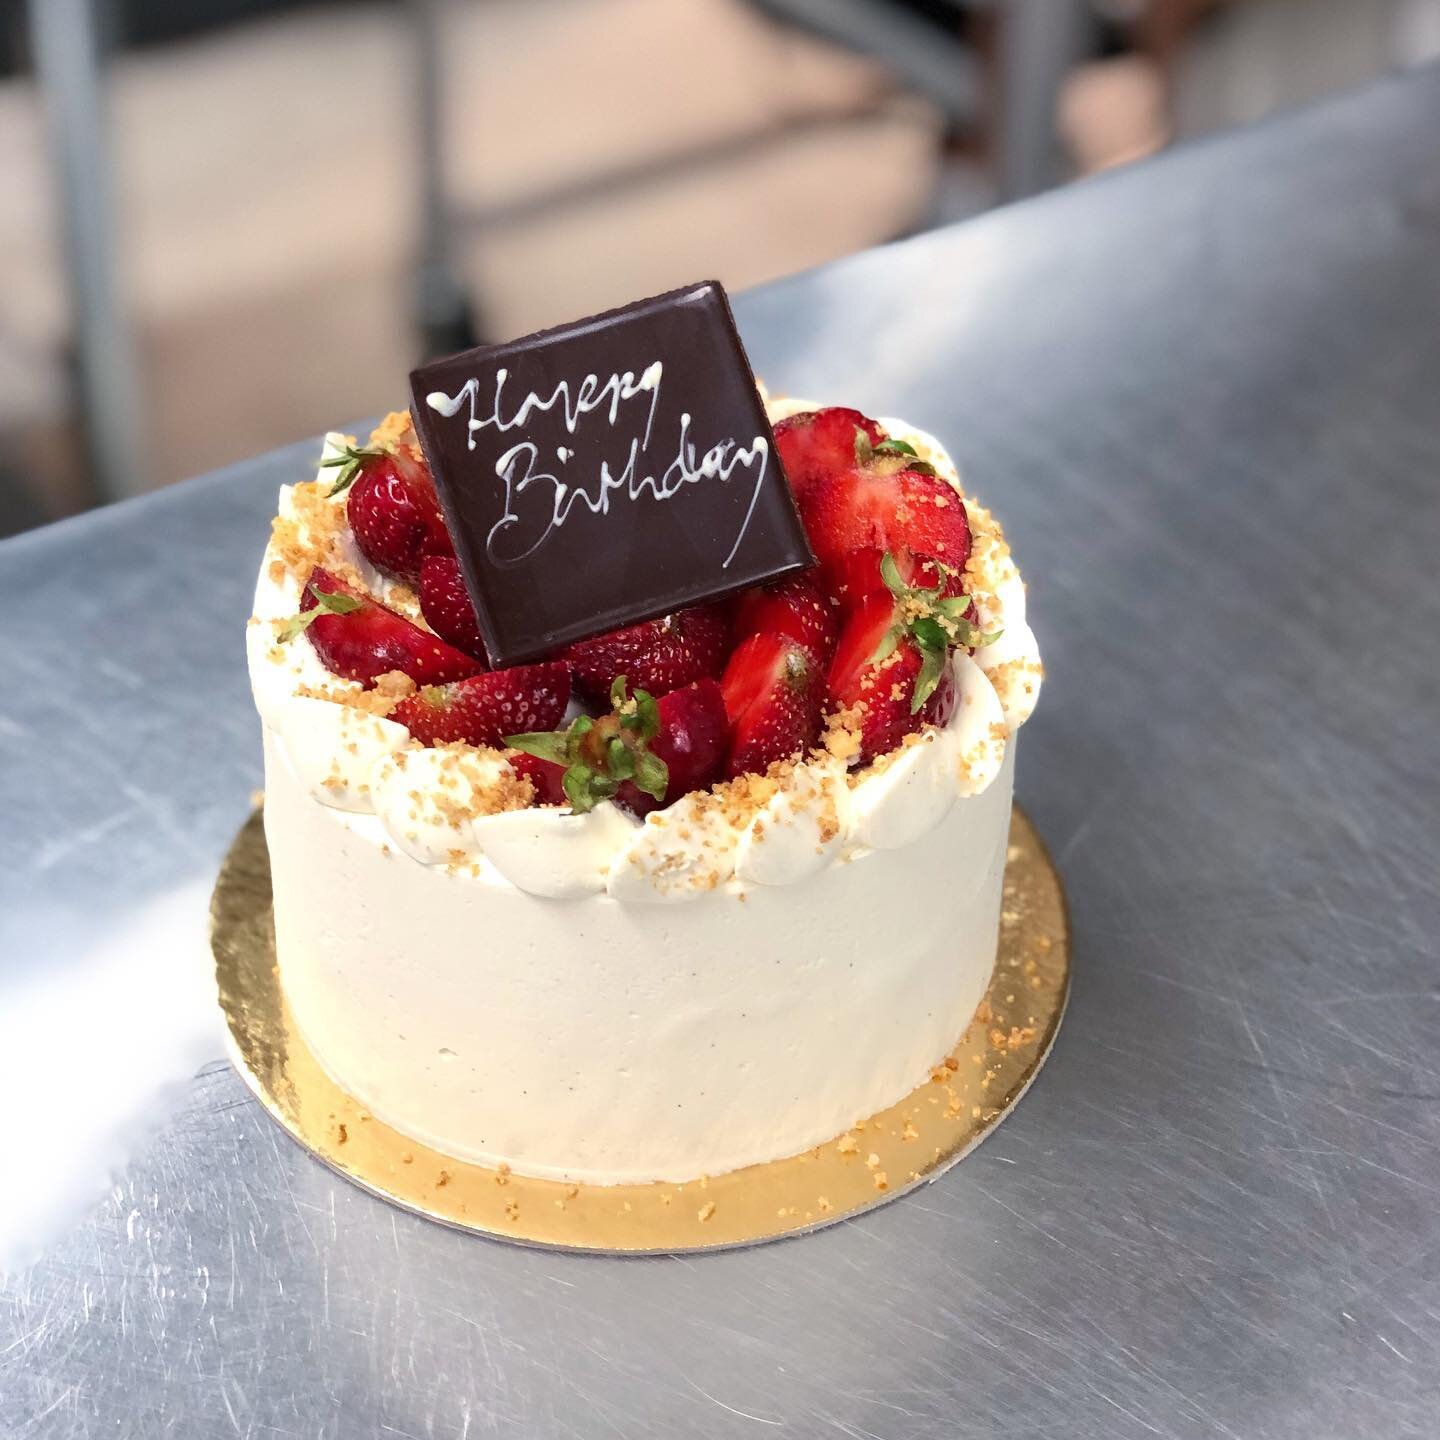 Father&rsquo;s Day Week Alert!

Starting now! You can preorder on our website for next week this cake made from the most amazing fresh local strawberries. Simple and delicious. That&rsquo;s it!

As with all our new cakes and especially during special